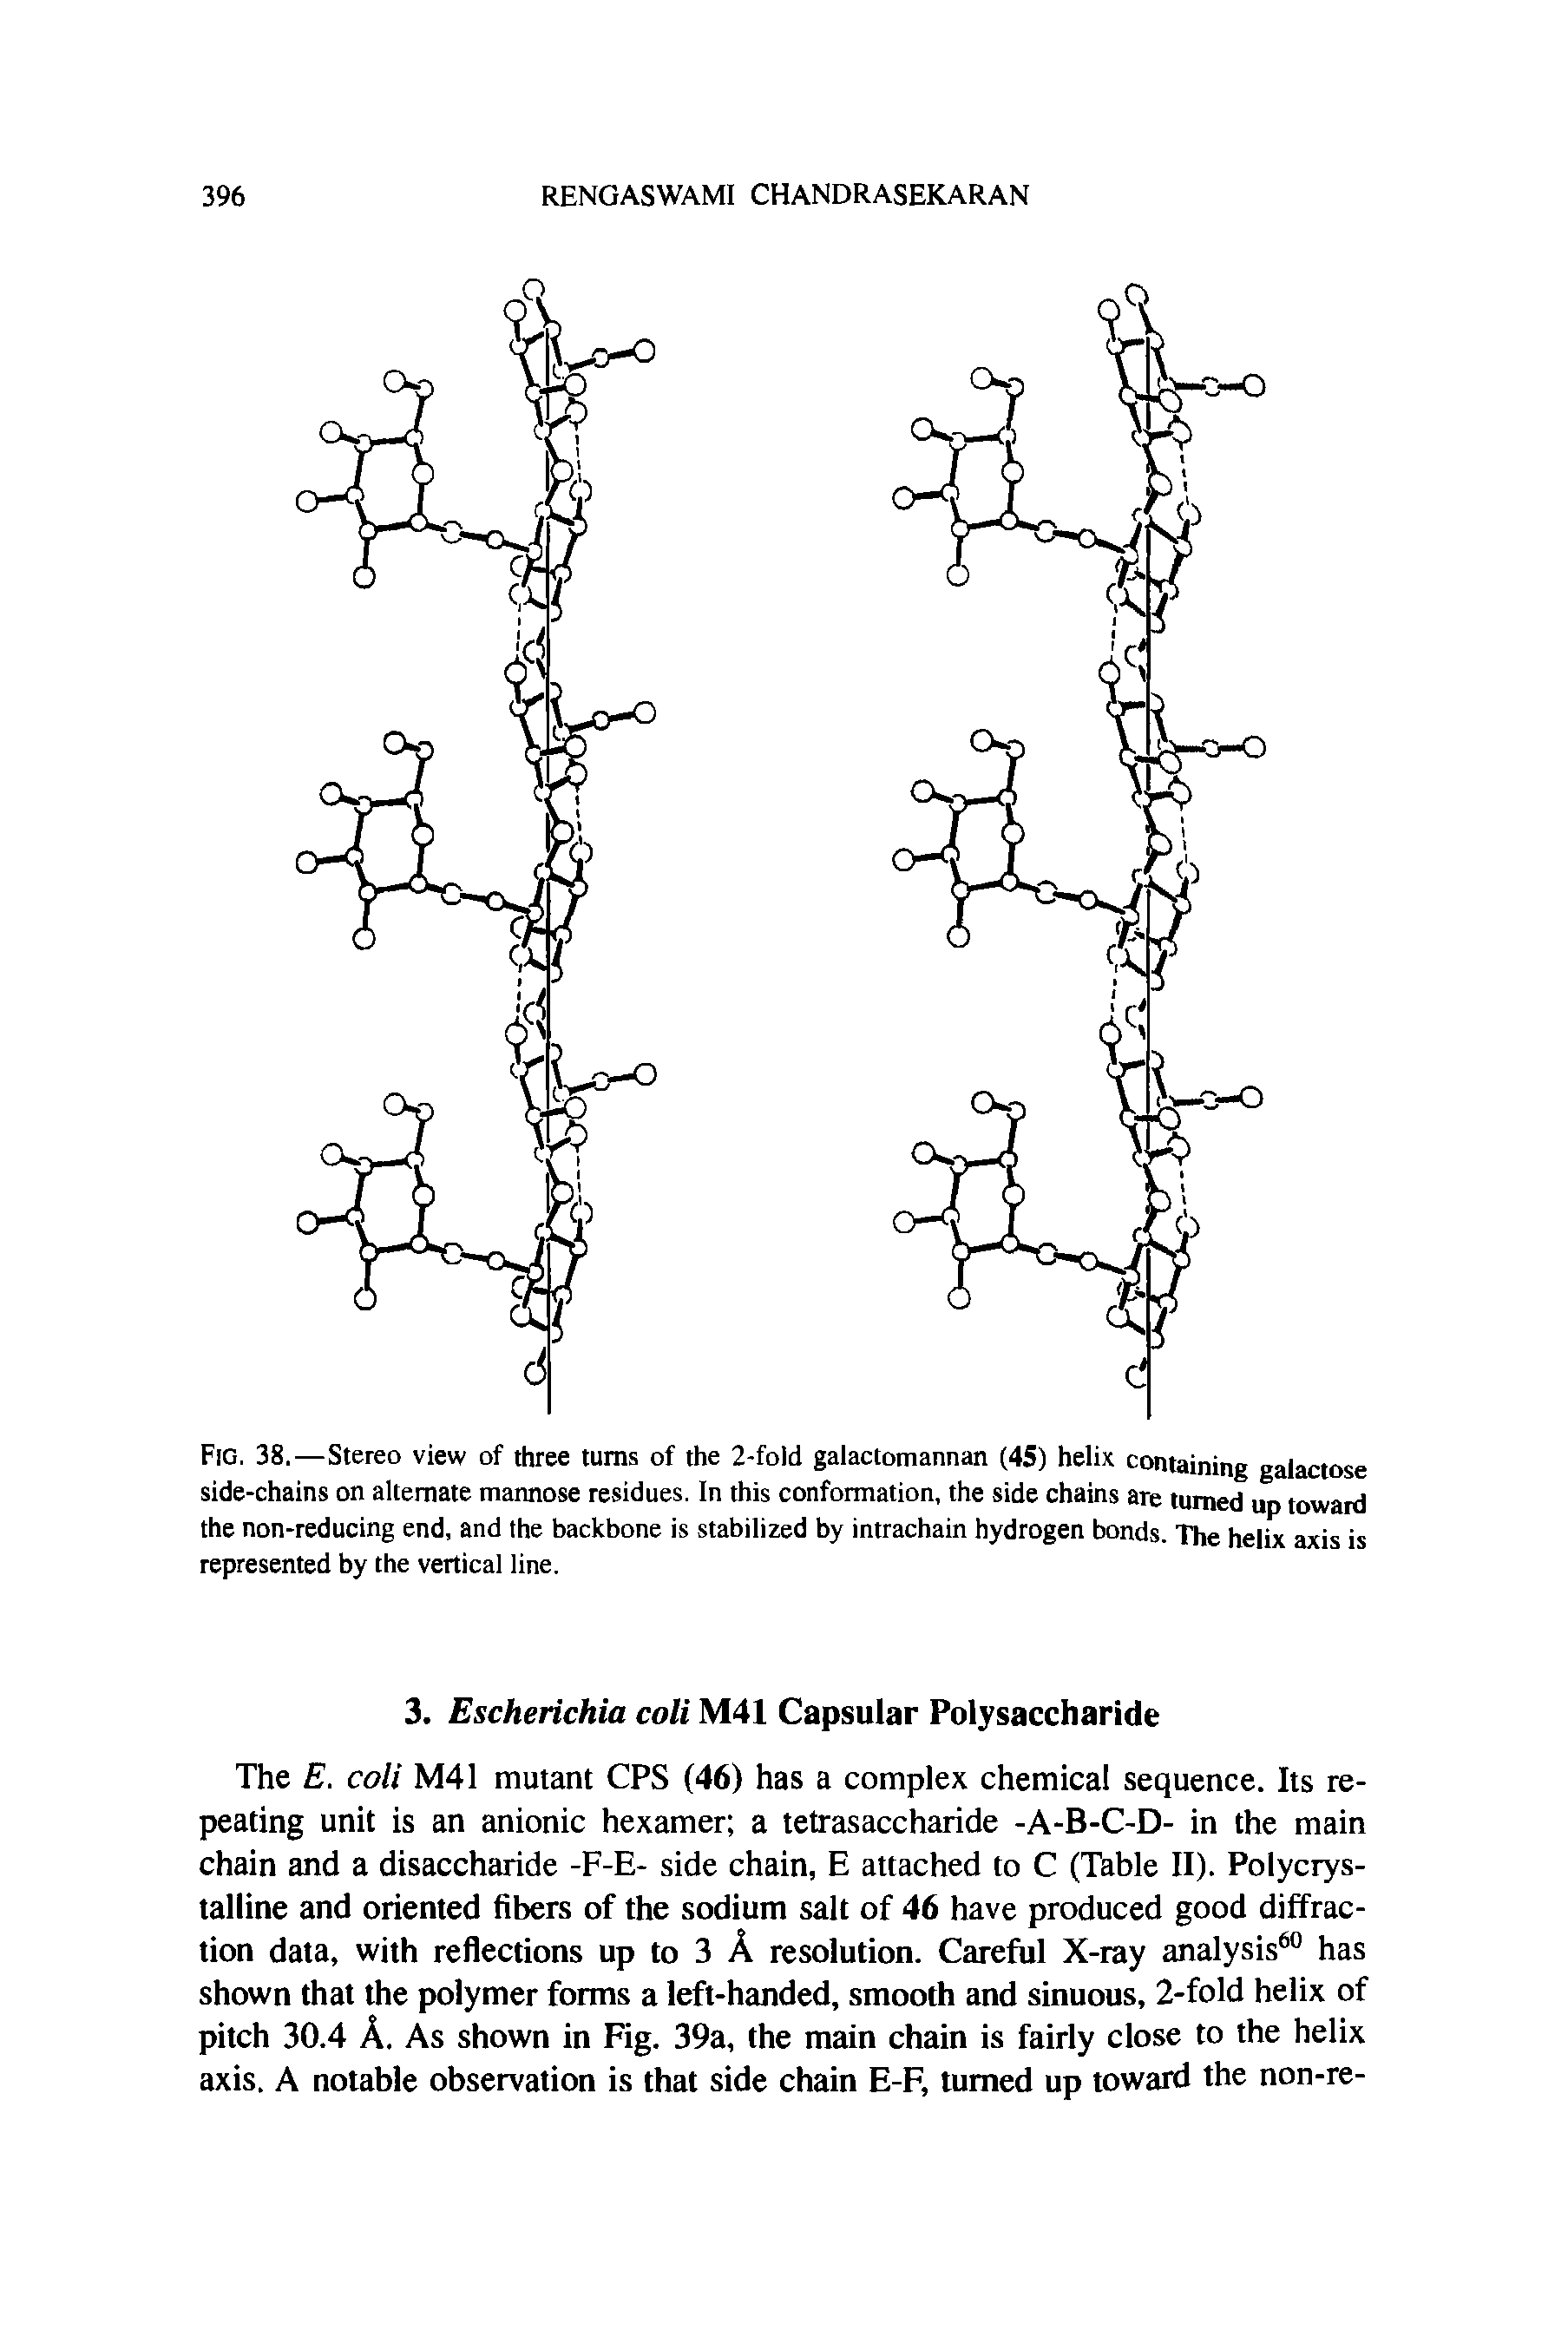 Fig. 38.—Stereo view of three turns of the 2-fold galactomannan (45) helix containing galactose side-chains on alternate mannose residues. In this conformation, the side chains are turned up toward the non-reducing end, and the backbone is stabilized by intrachain hydrogen bonds. The helix axis is represented by the vertical line.